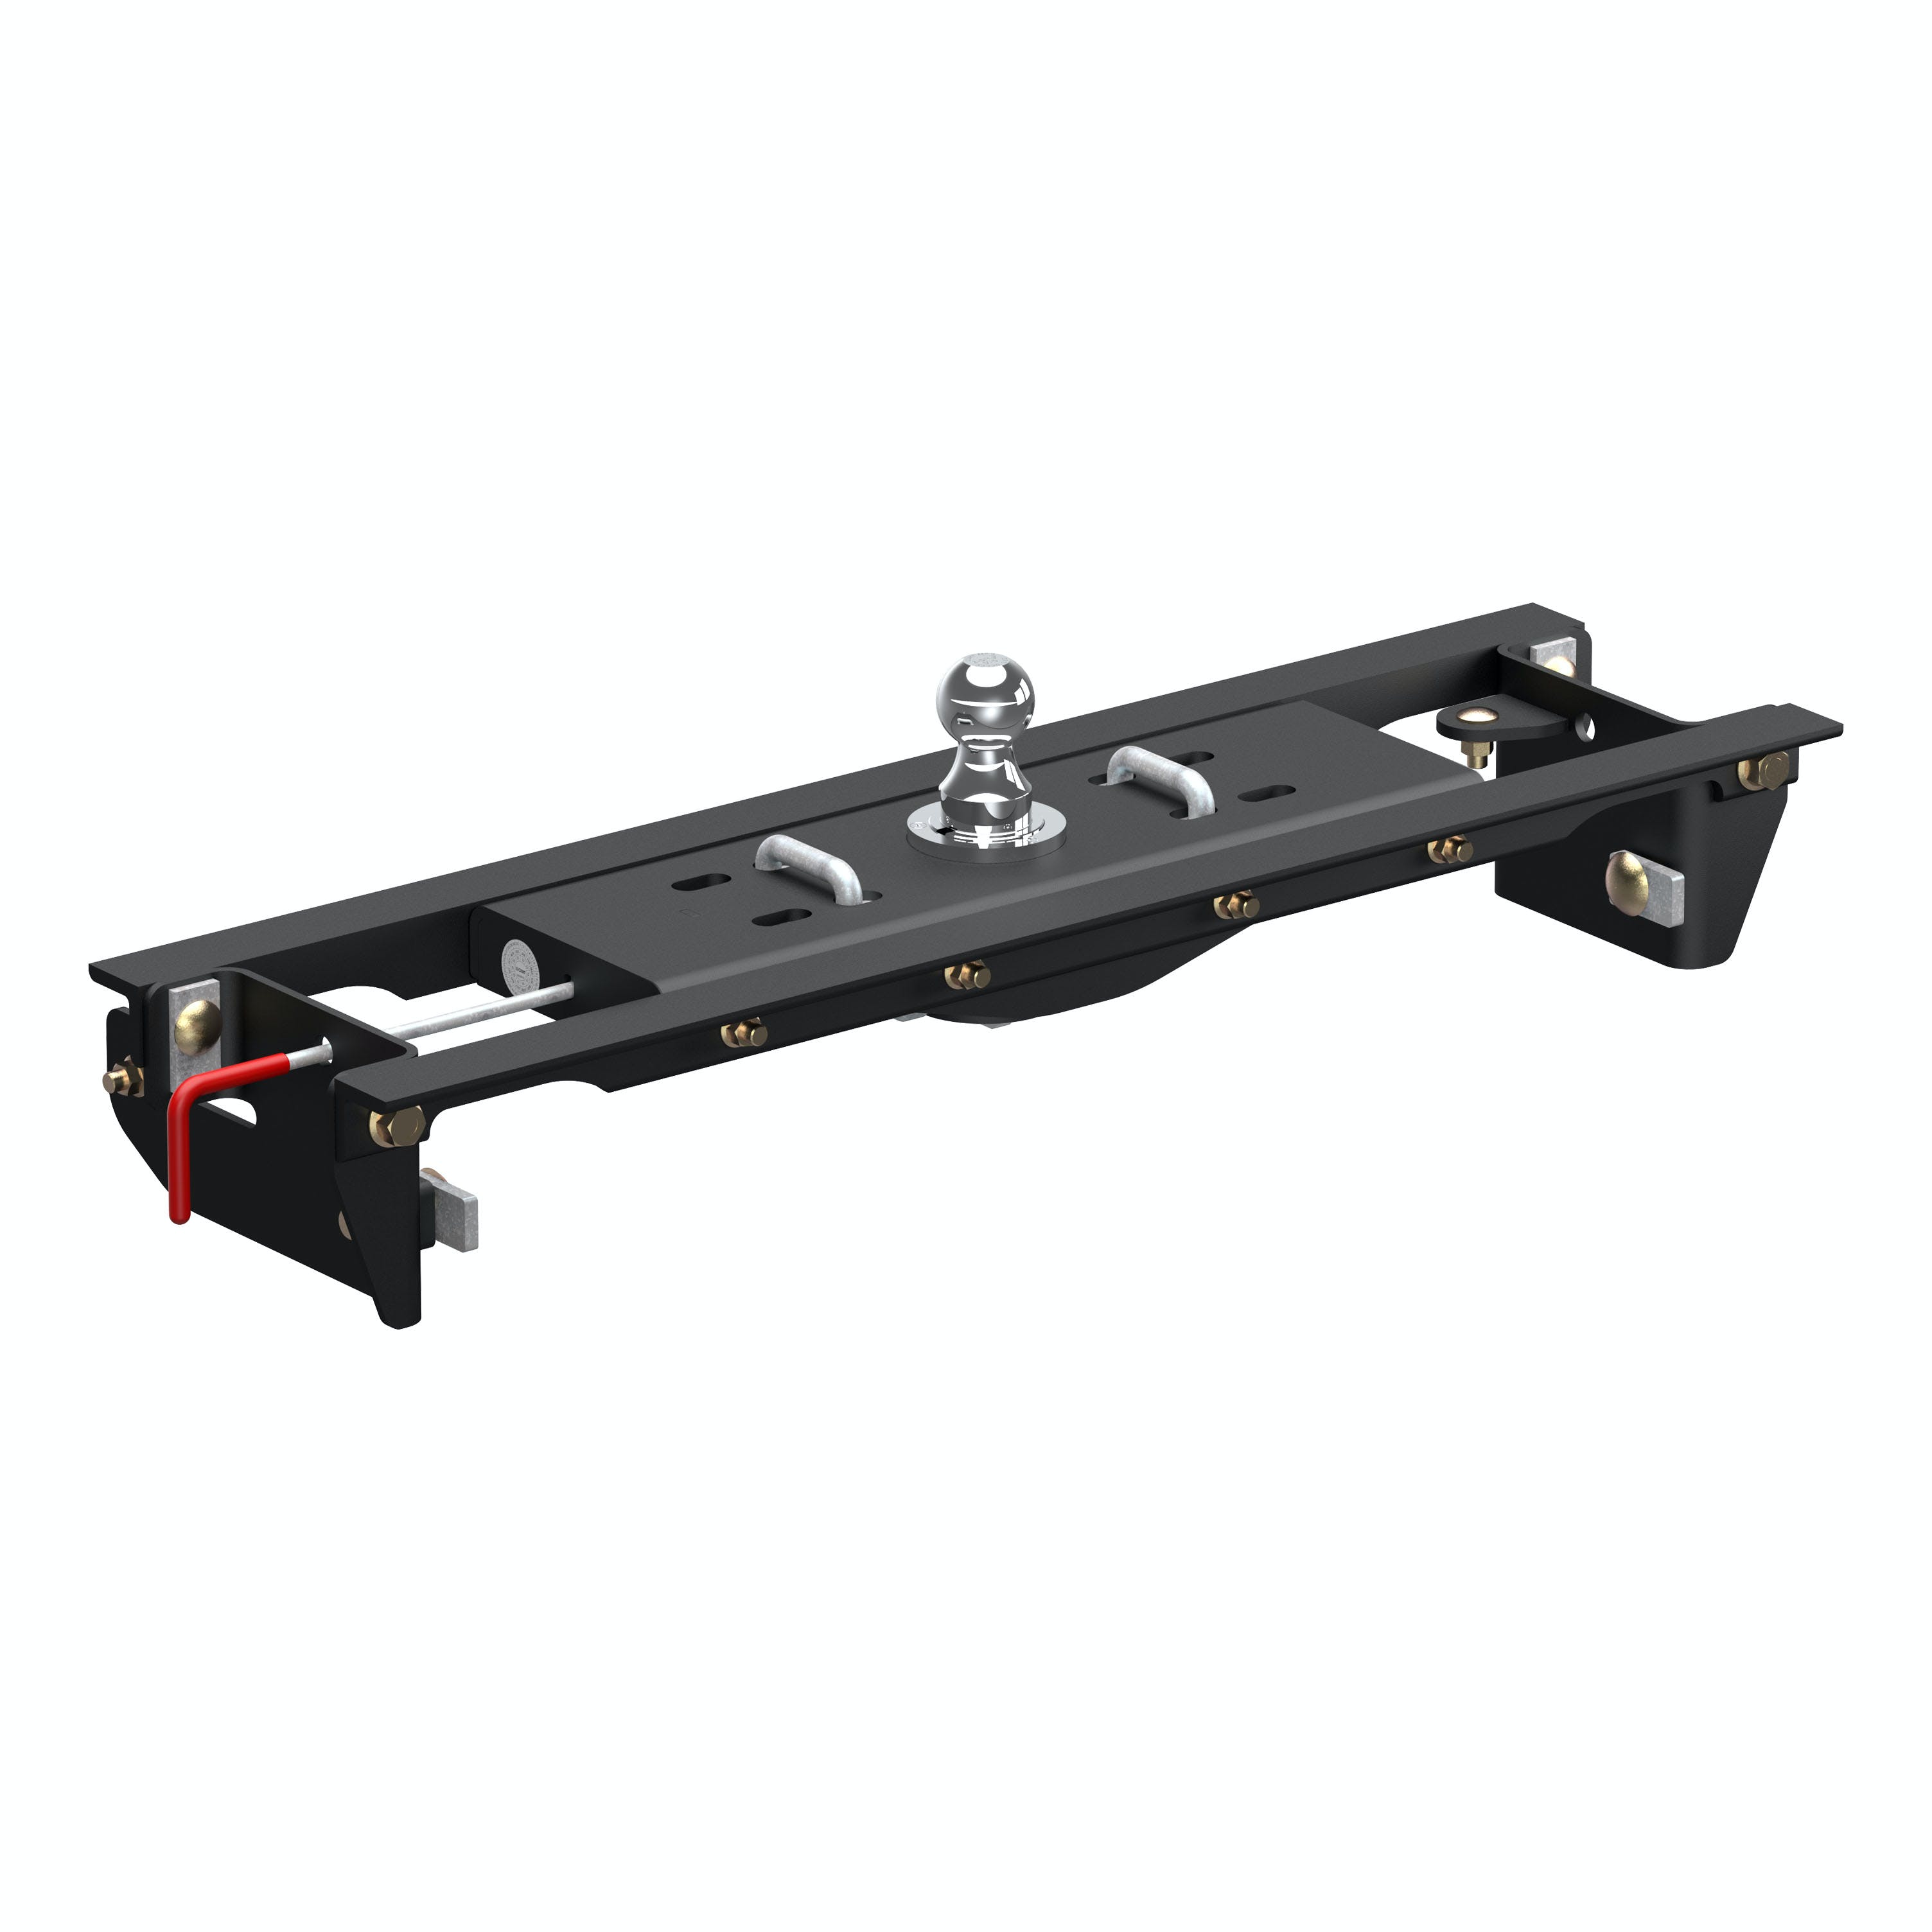 CURT 60683 Double Lock EZr Gooseneck Hitch Kit with Brackets, Select Ford F-250, F-350